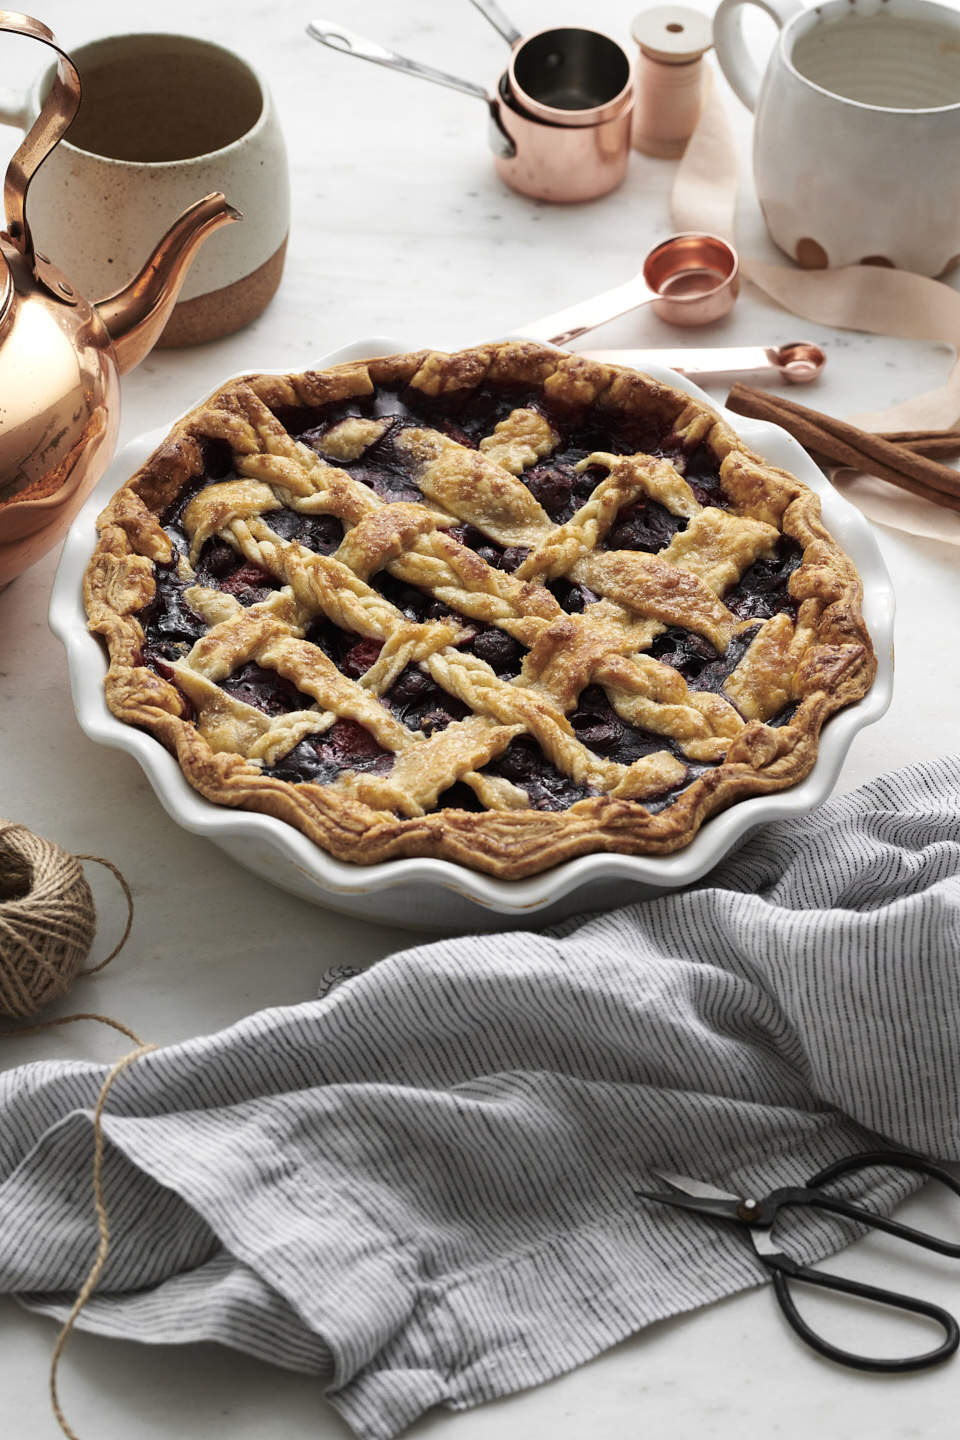 country living Berry Pie styled by Jessica Stewart Prop Stylist Specializing in food styling Imagery and set design